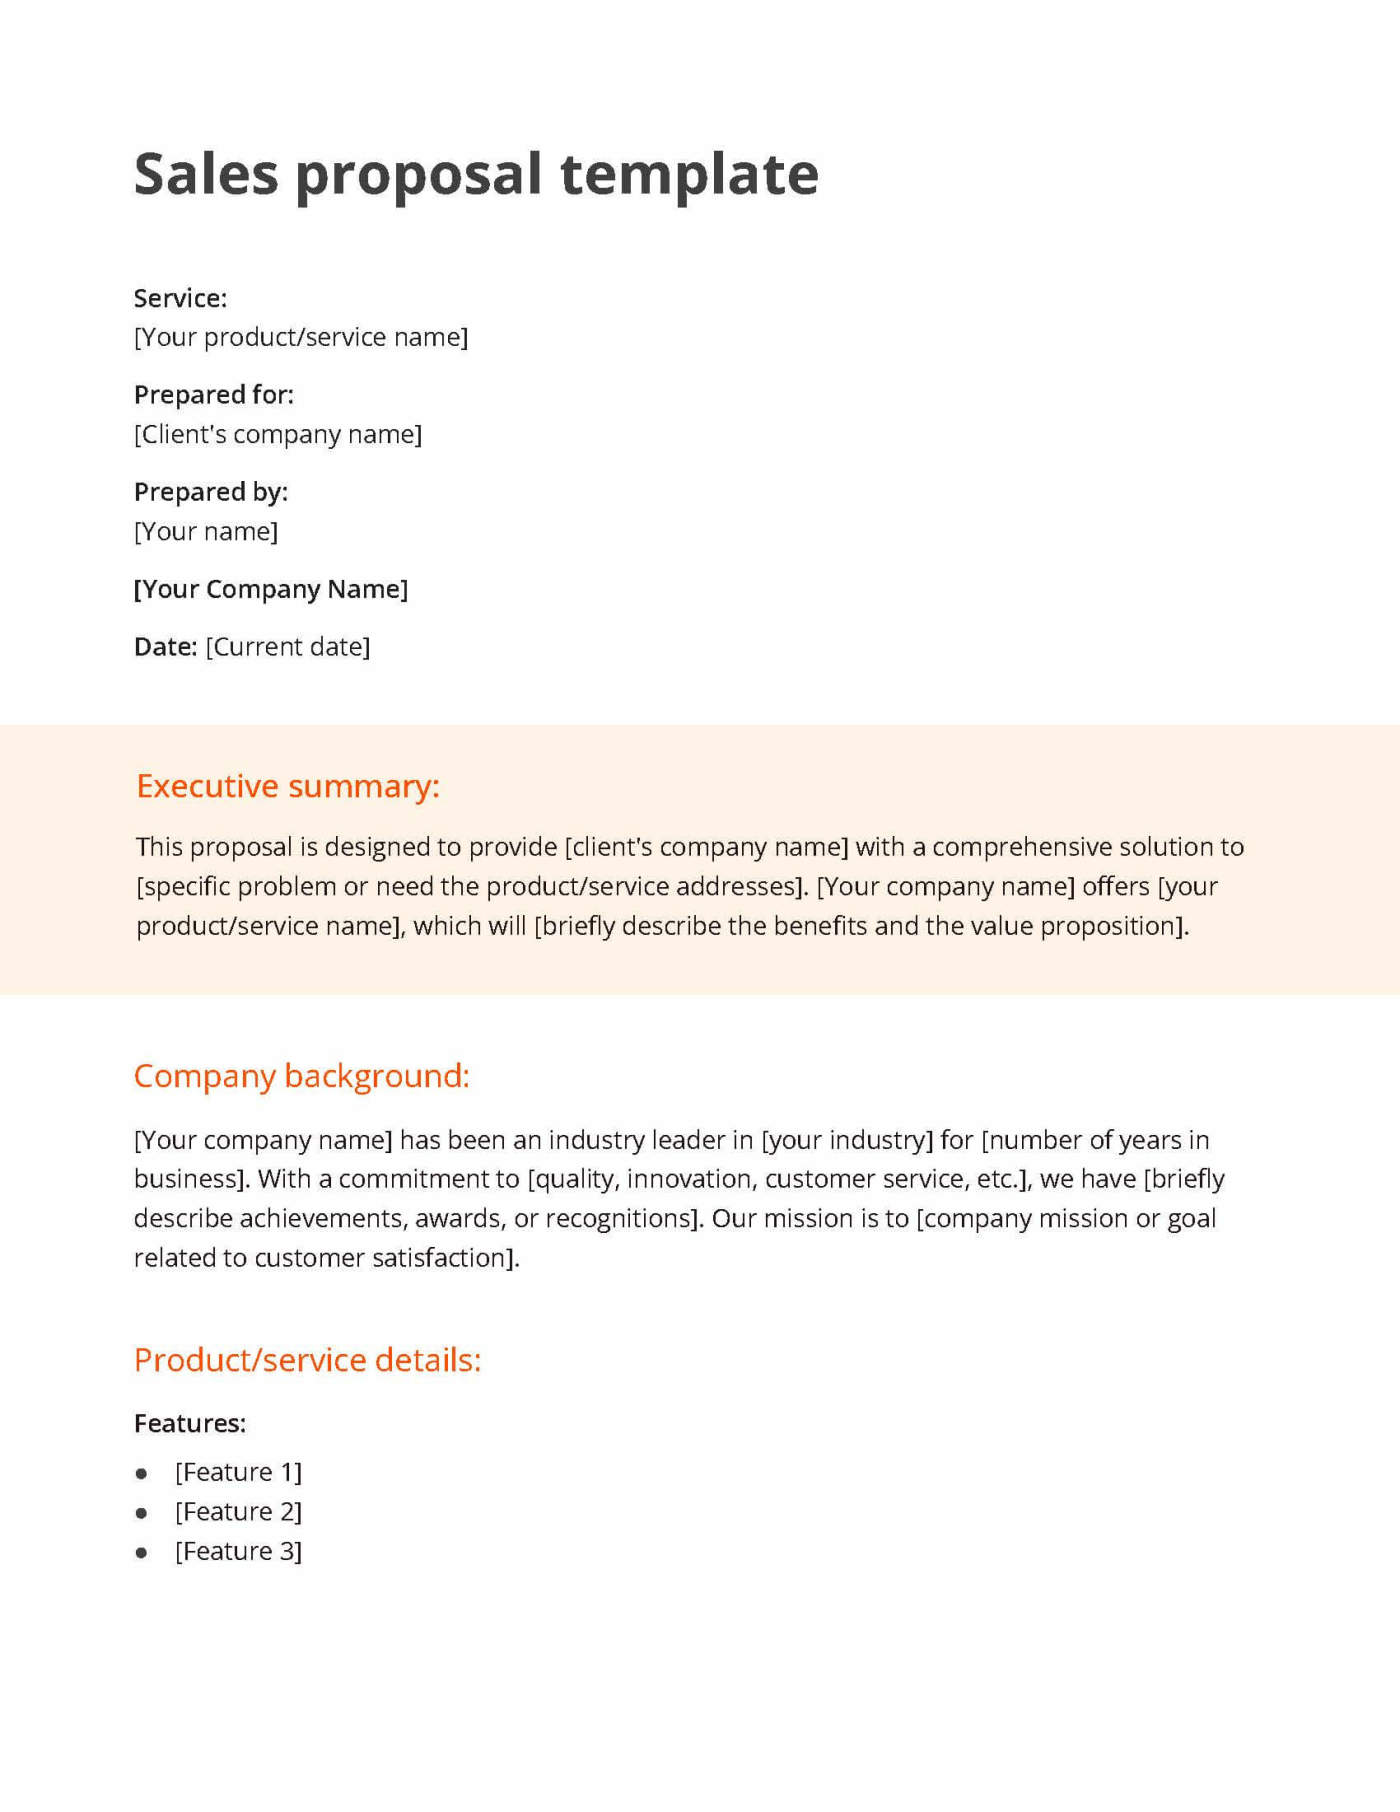 White and orange sales proposal template including a section for the executive summary, company background and product/service details